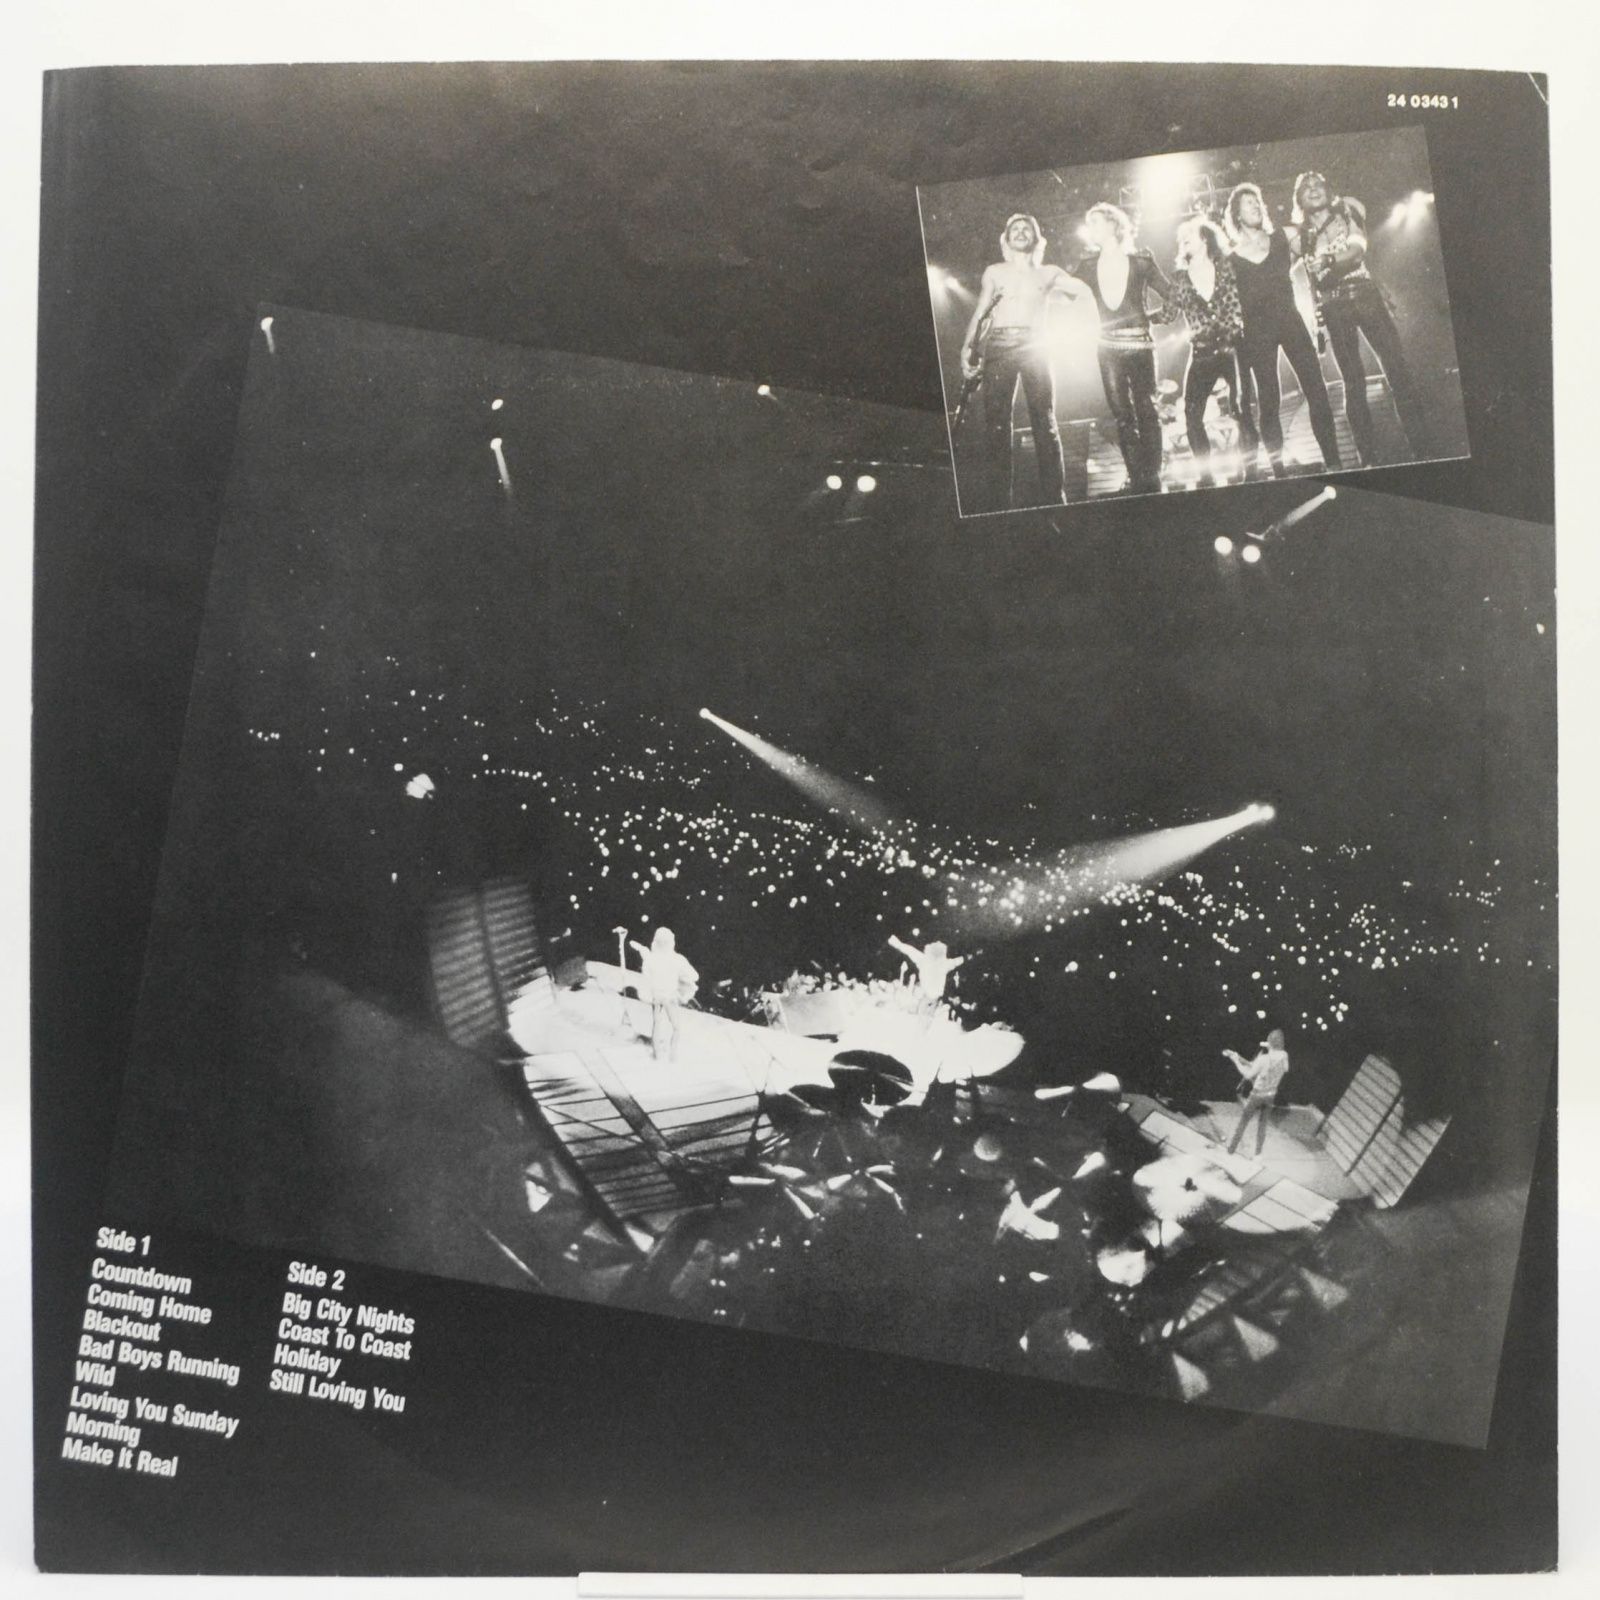 Scorpions — World Wide Live (2LP, poster), 1985